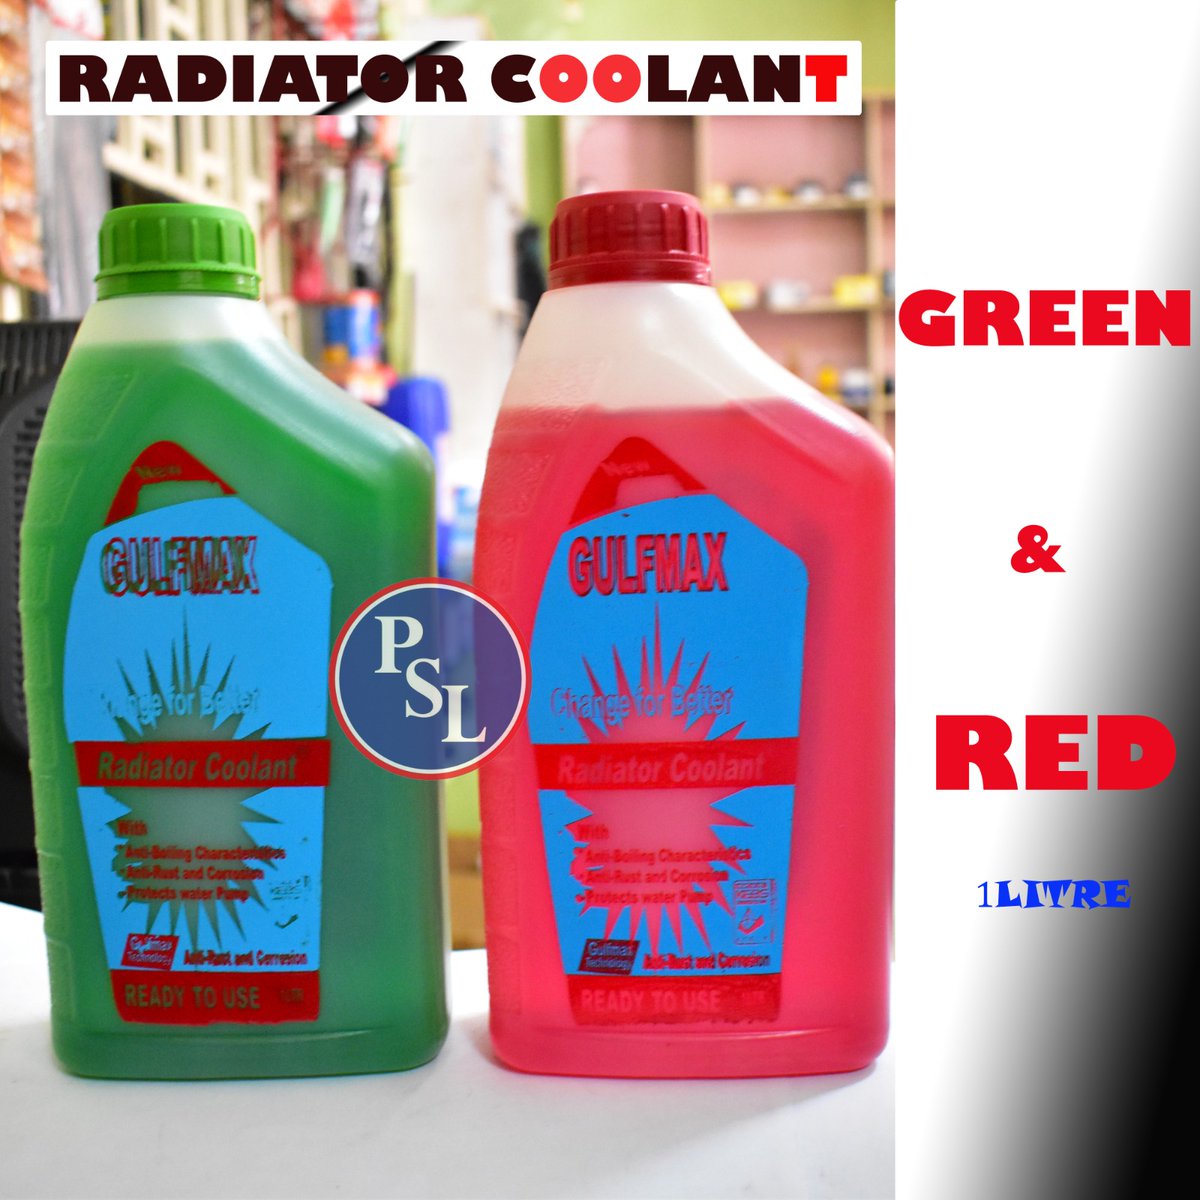 Help regulate your engine temperature with the best radiator coolant Gulfmax. Now available in 1L and 5L at an affordable price. Quality is our promise. #premiermotorspares #radiatorcoolant #evemungai Kasarani Kelvin Kiptum Omah Lay Lukaku President Ruto #Dollar Roma MacG